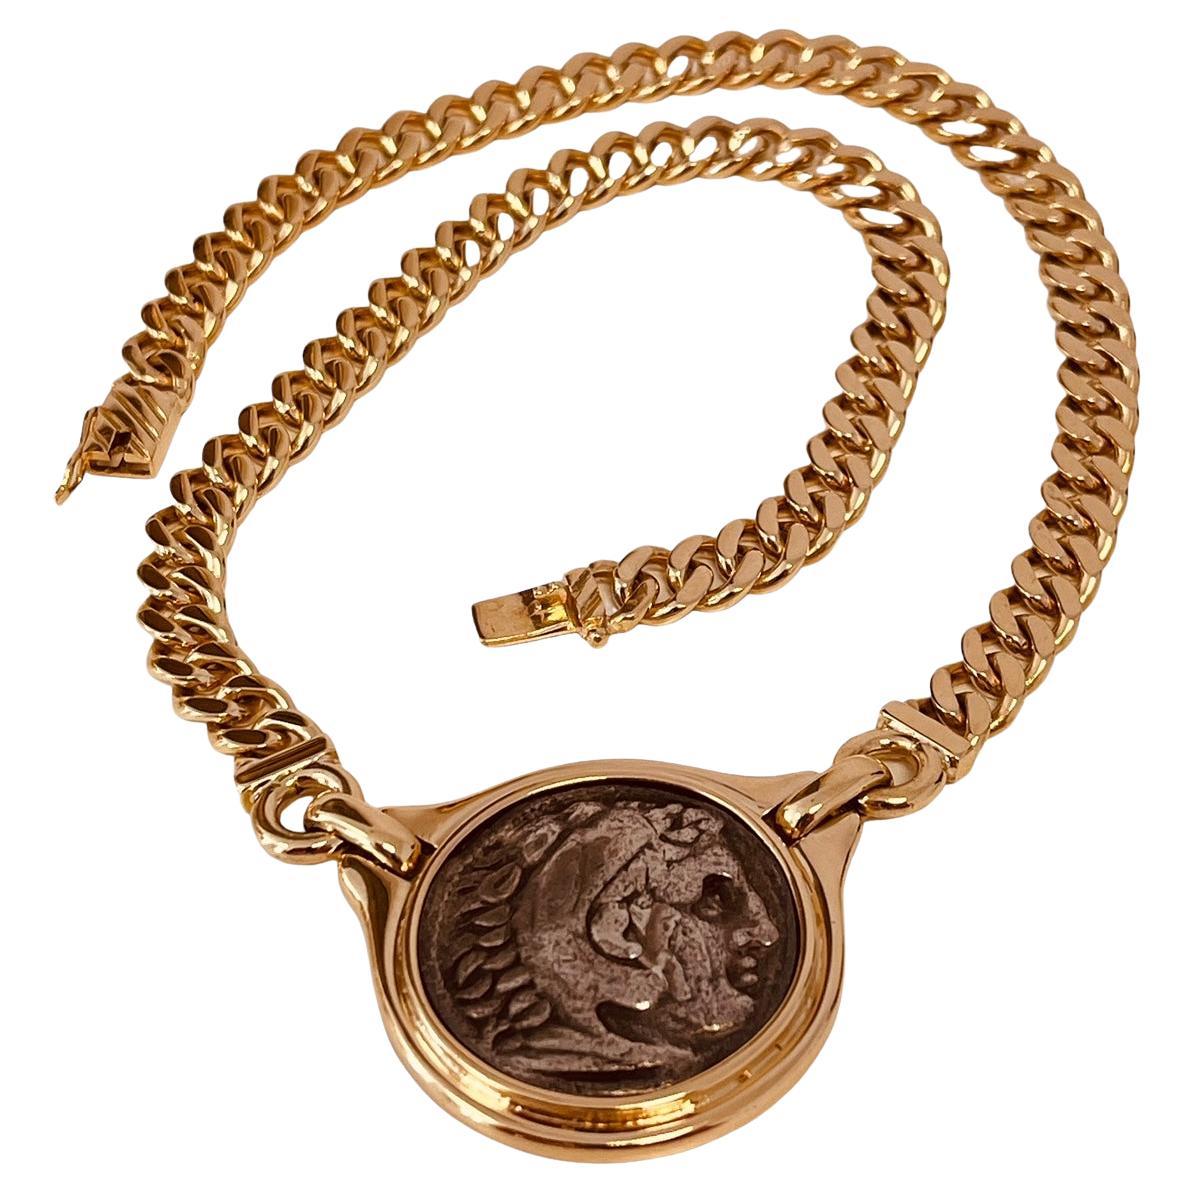 18ct Gold Link Necklace Centring A Reproduction Of An Antique Greek Silver Coin For Sale